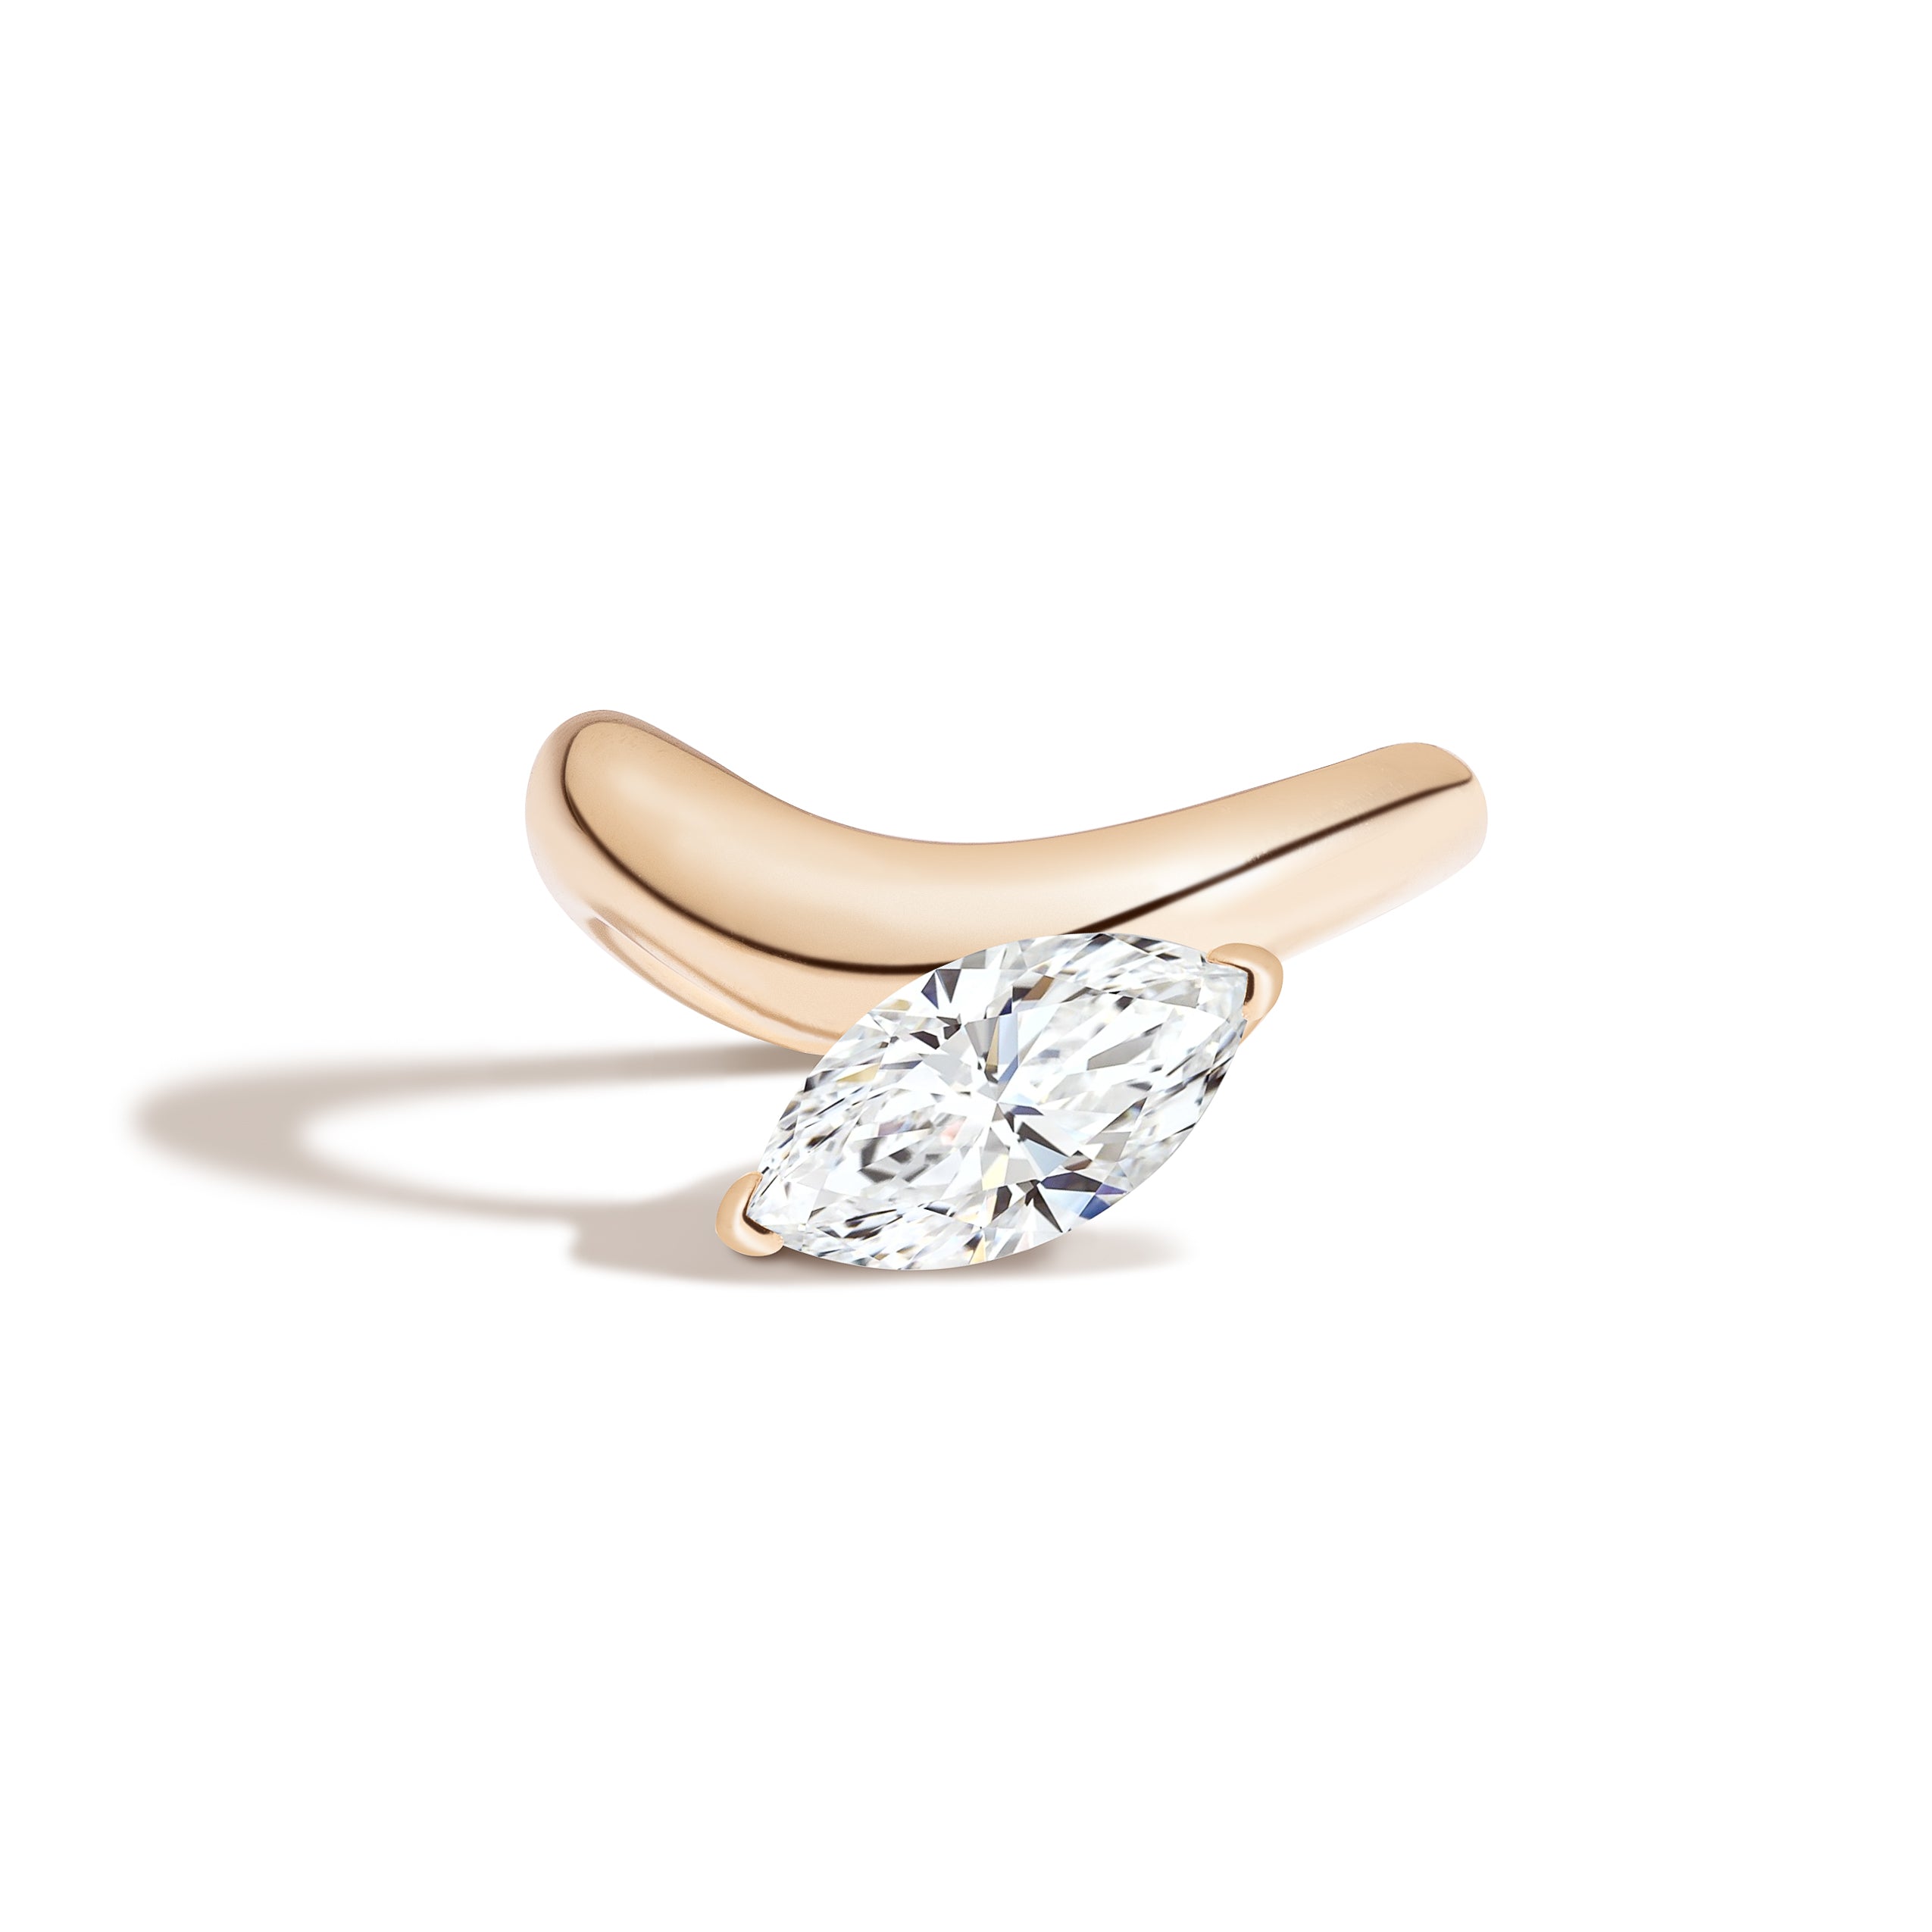 Shahla Karimi Cloud Offset Marquise Ring 14K Yellow Gold